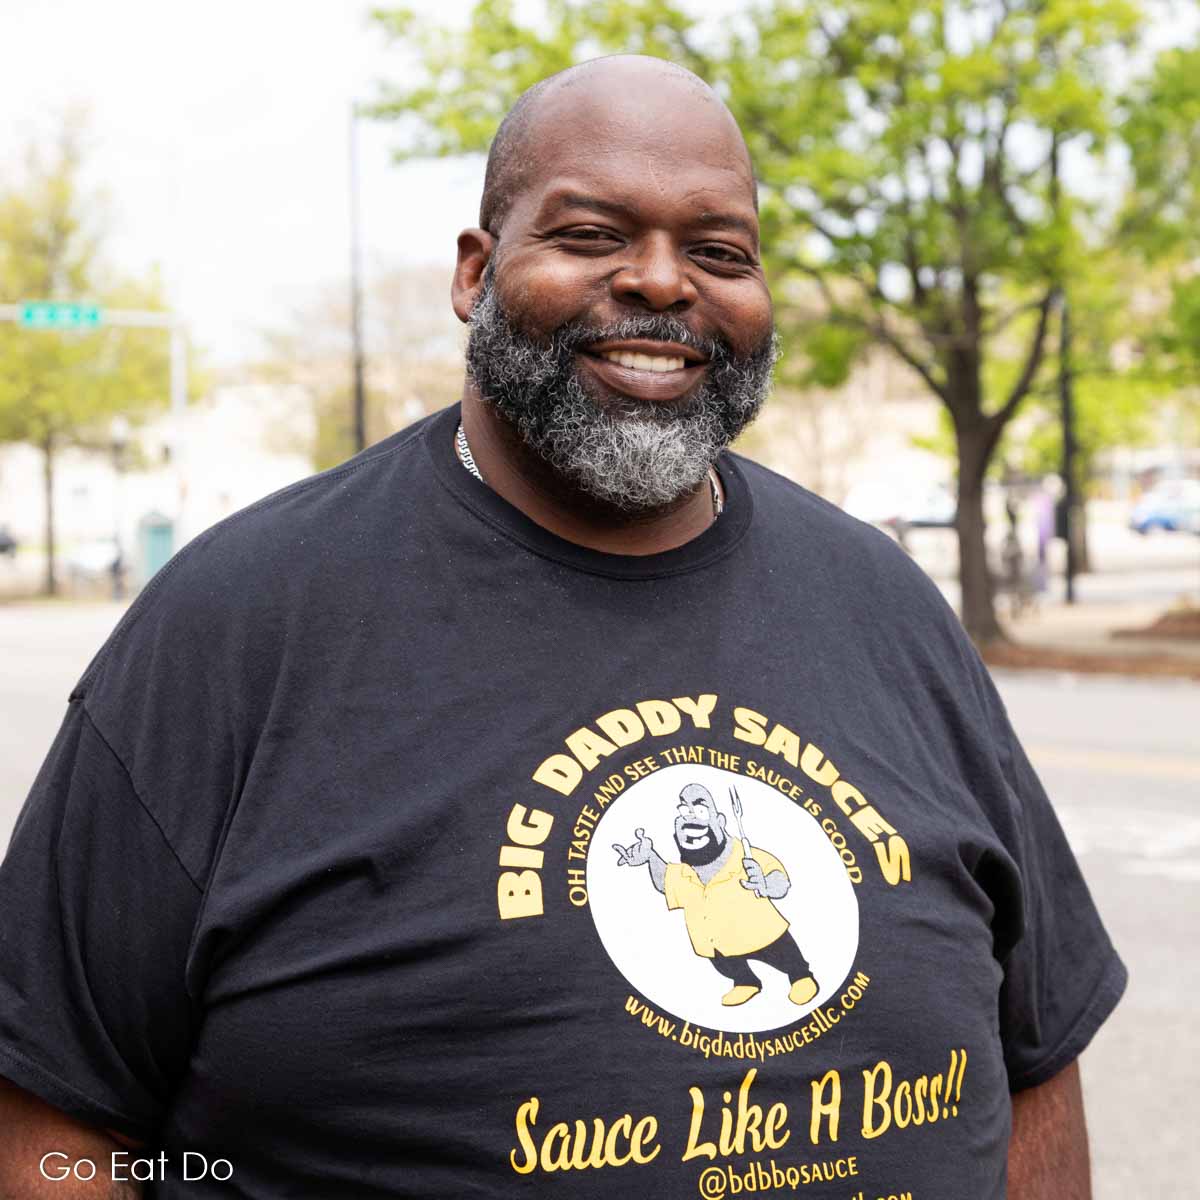 Chef Dwayne Thompson, the creator of Big Daddy Sauces.